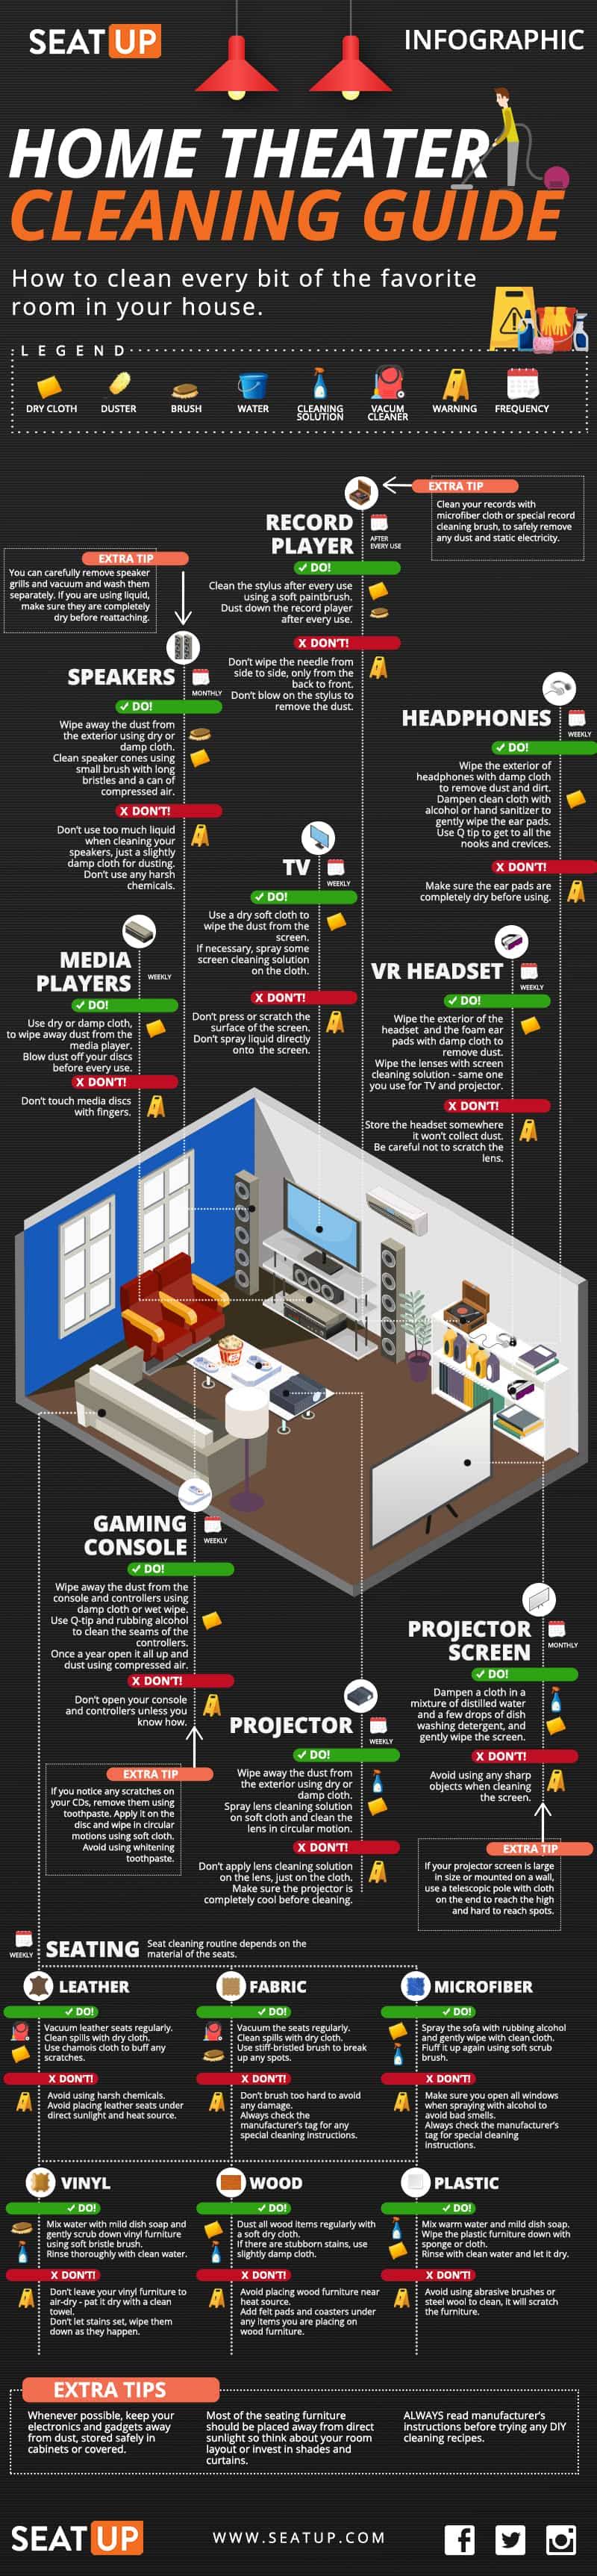 How To Clean Your Favorite Room – Home Theater Cleaning Guide #infographic